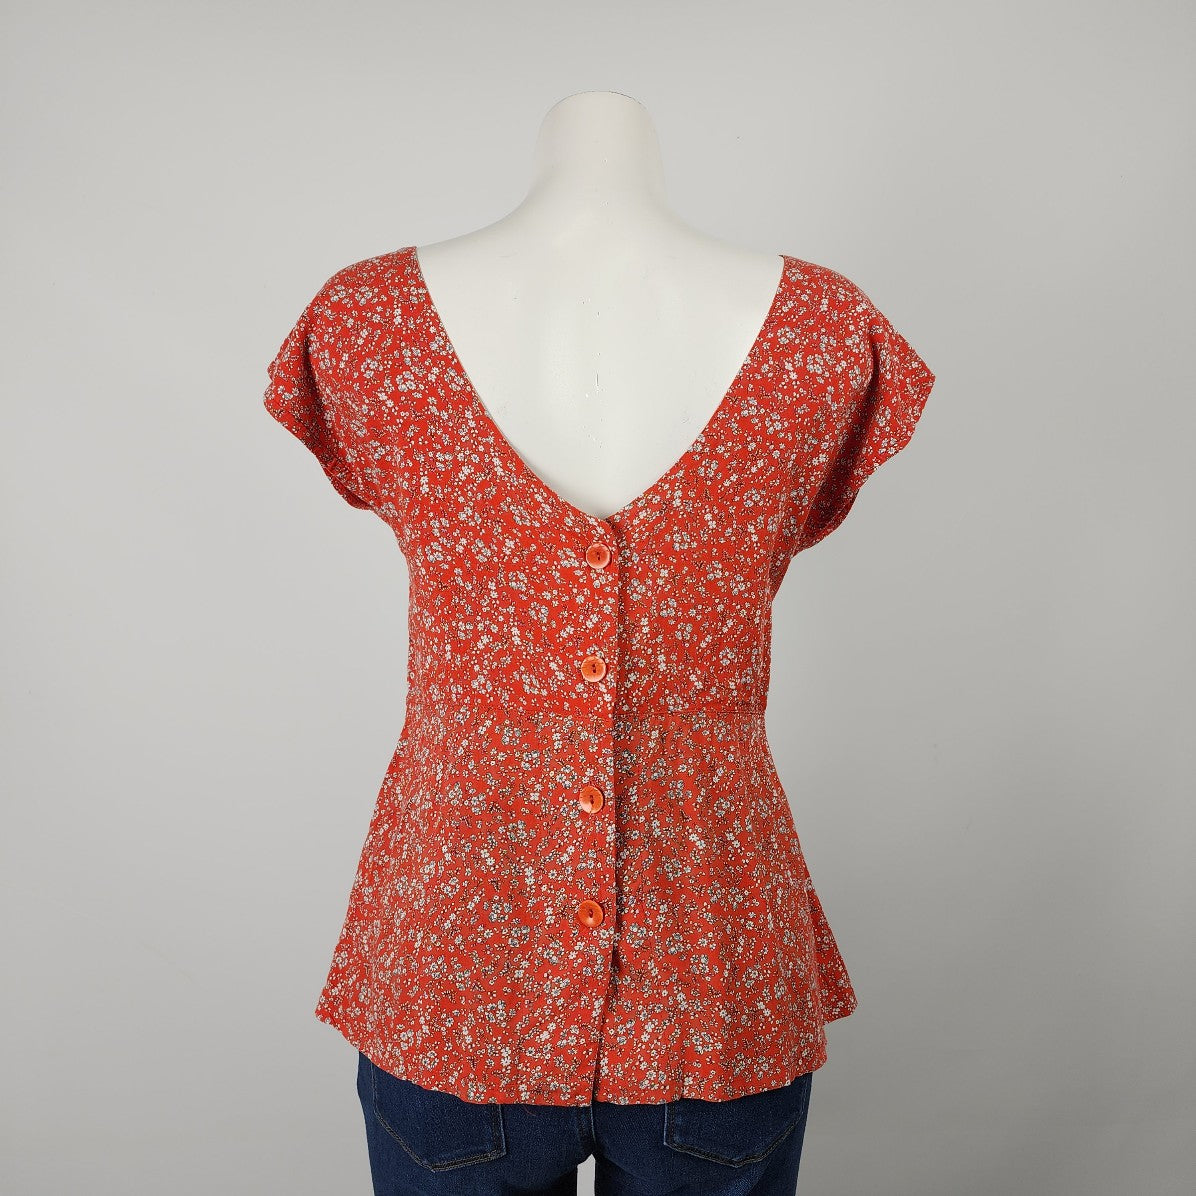 Sabrina Butterfly Red Floral Short Sleeve Top Size S/M